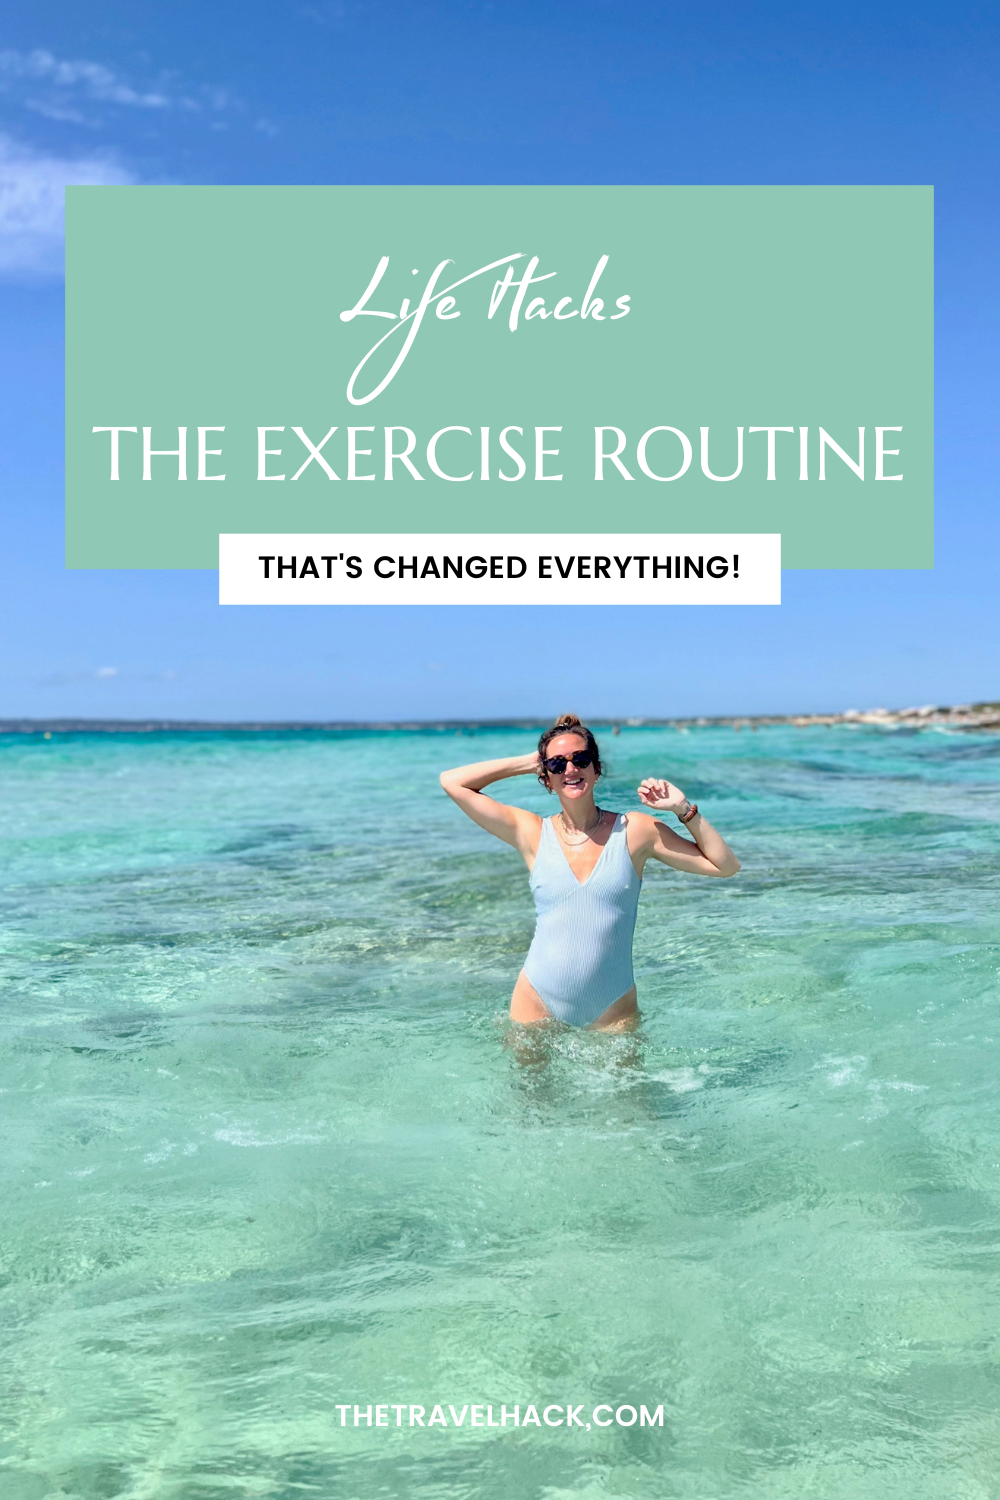 Life Hacks: The exercise routine that has changed everything